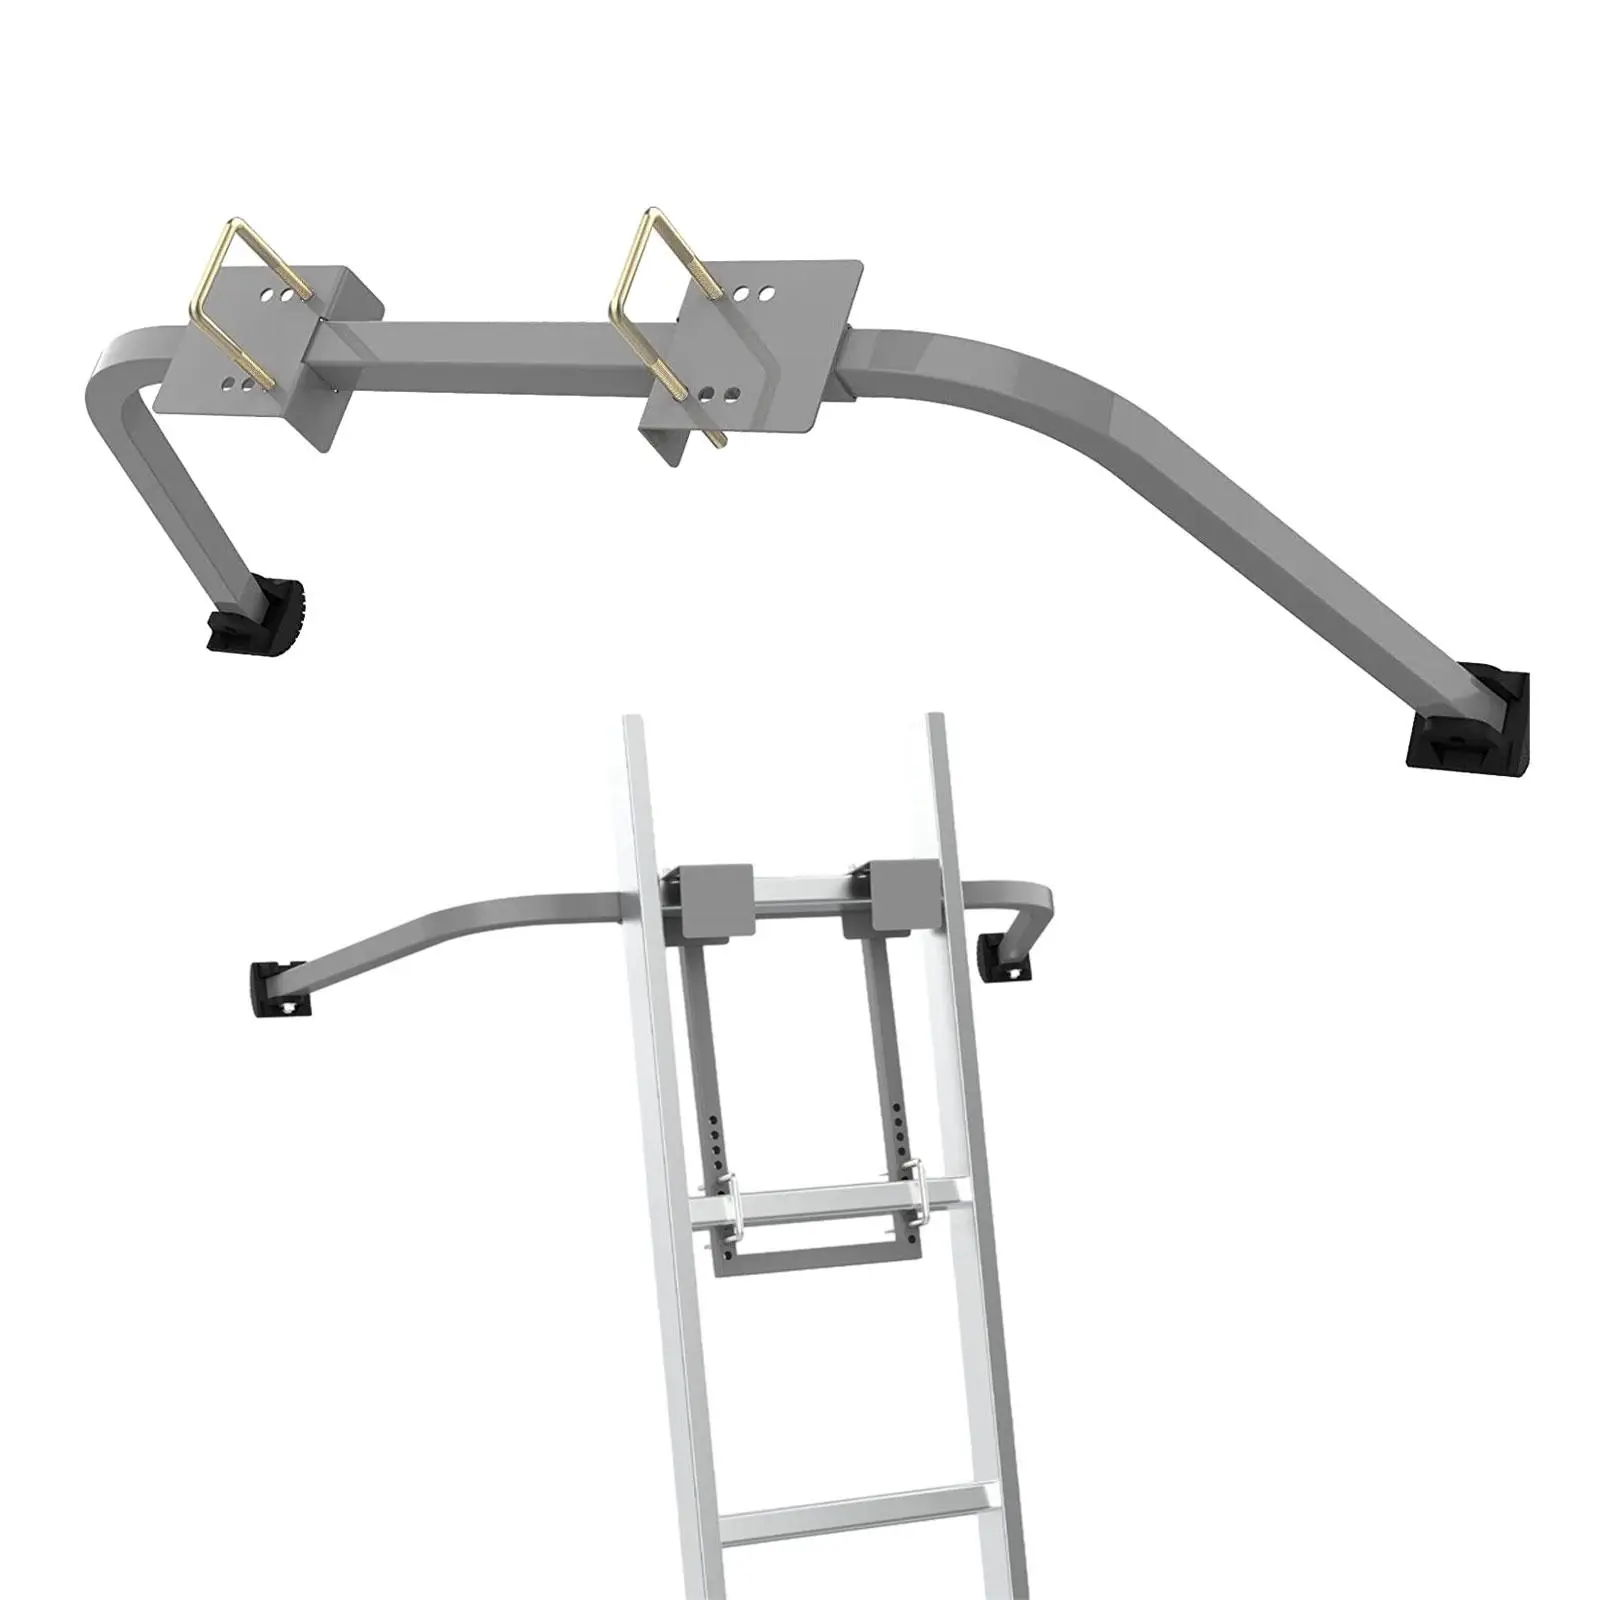 Ladder Stabilizer Accessory Portable Ladder Accessories Roof Ladder Standoff for Roof Ladders Gutter Outdoor Wall Projects Home